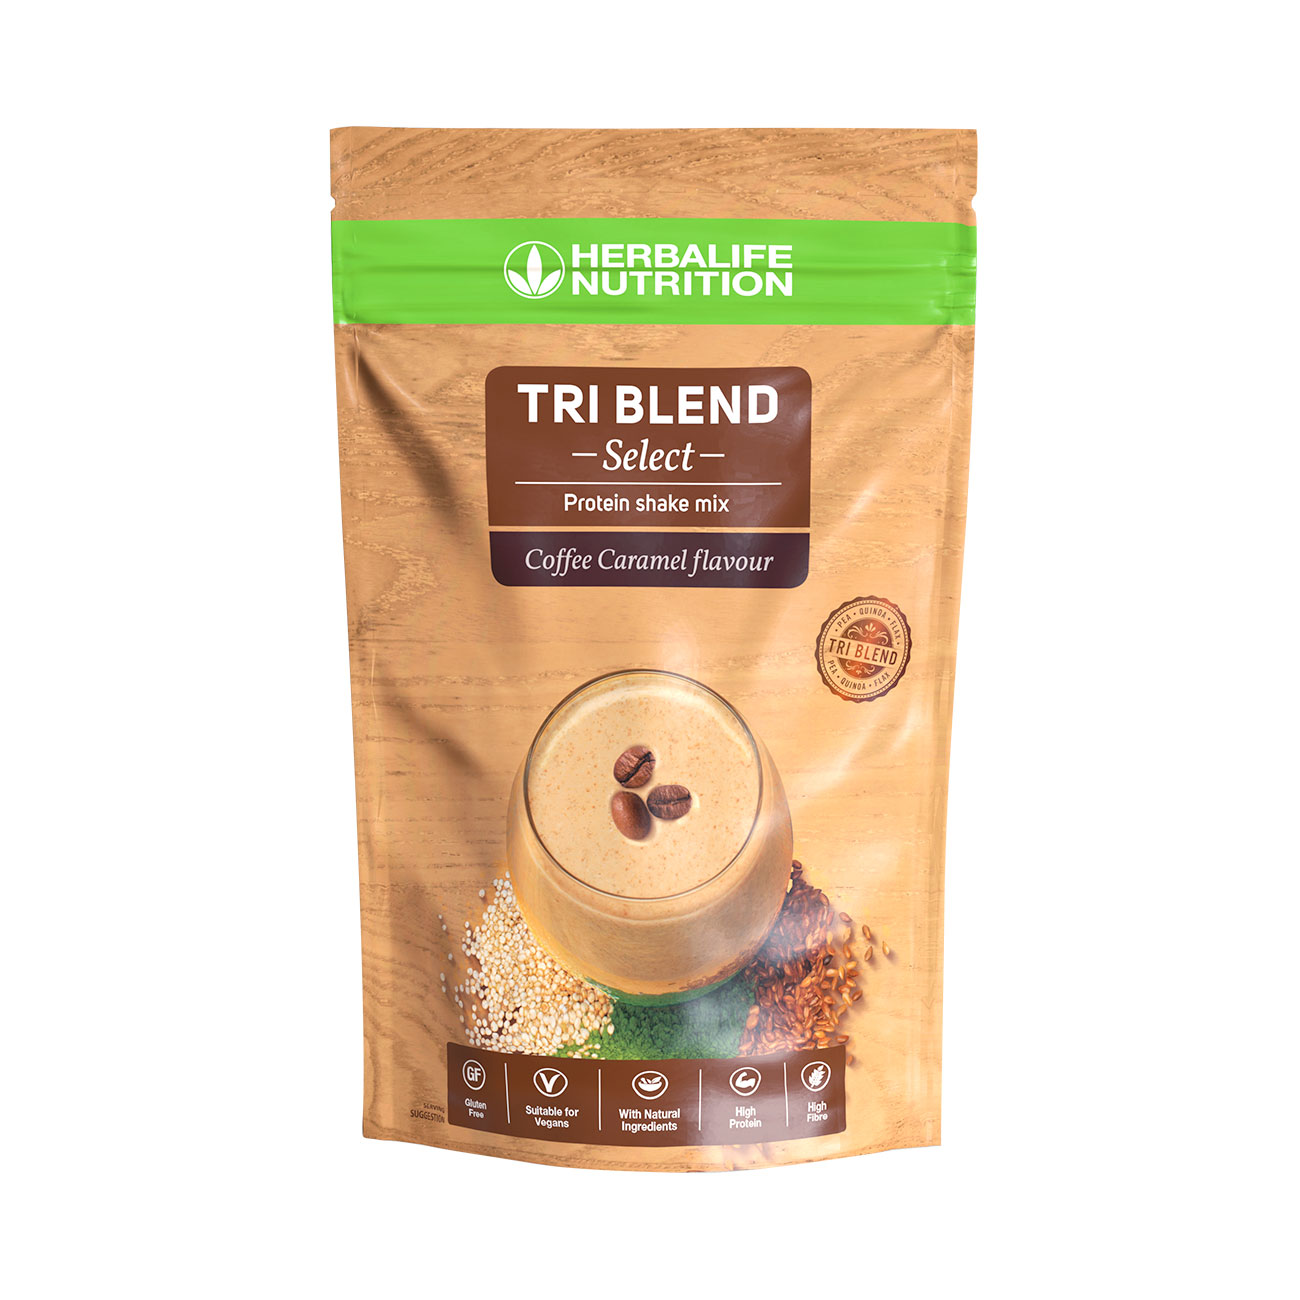 Tri Blend Select Protein Shake Mix Coffee Caramel Flavoured product shot